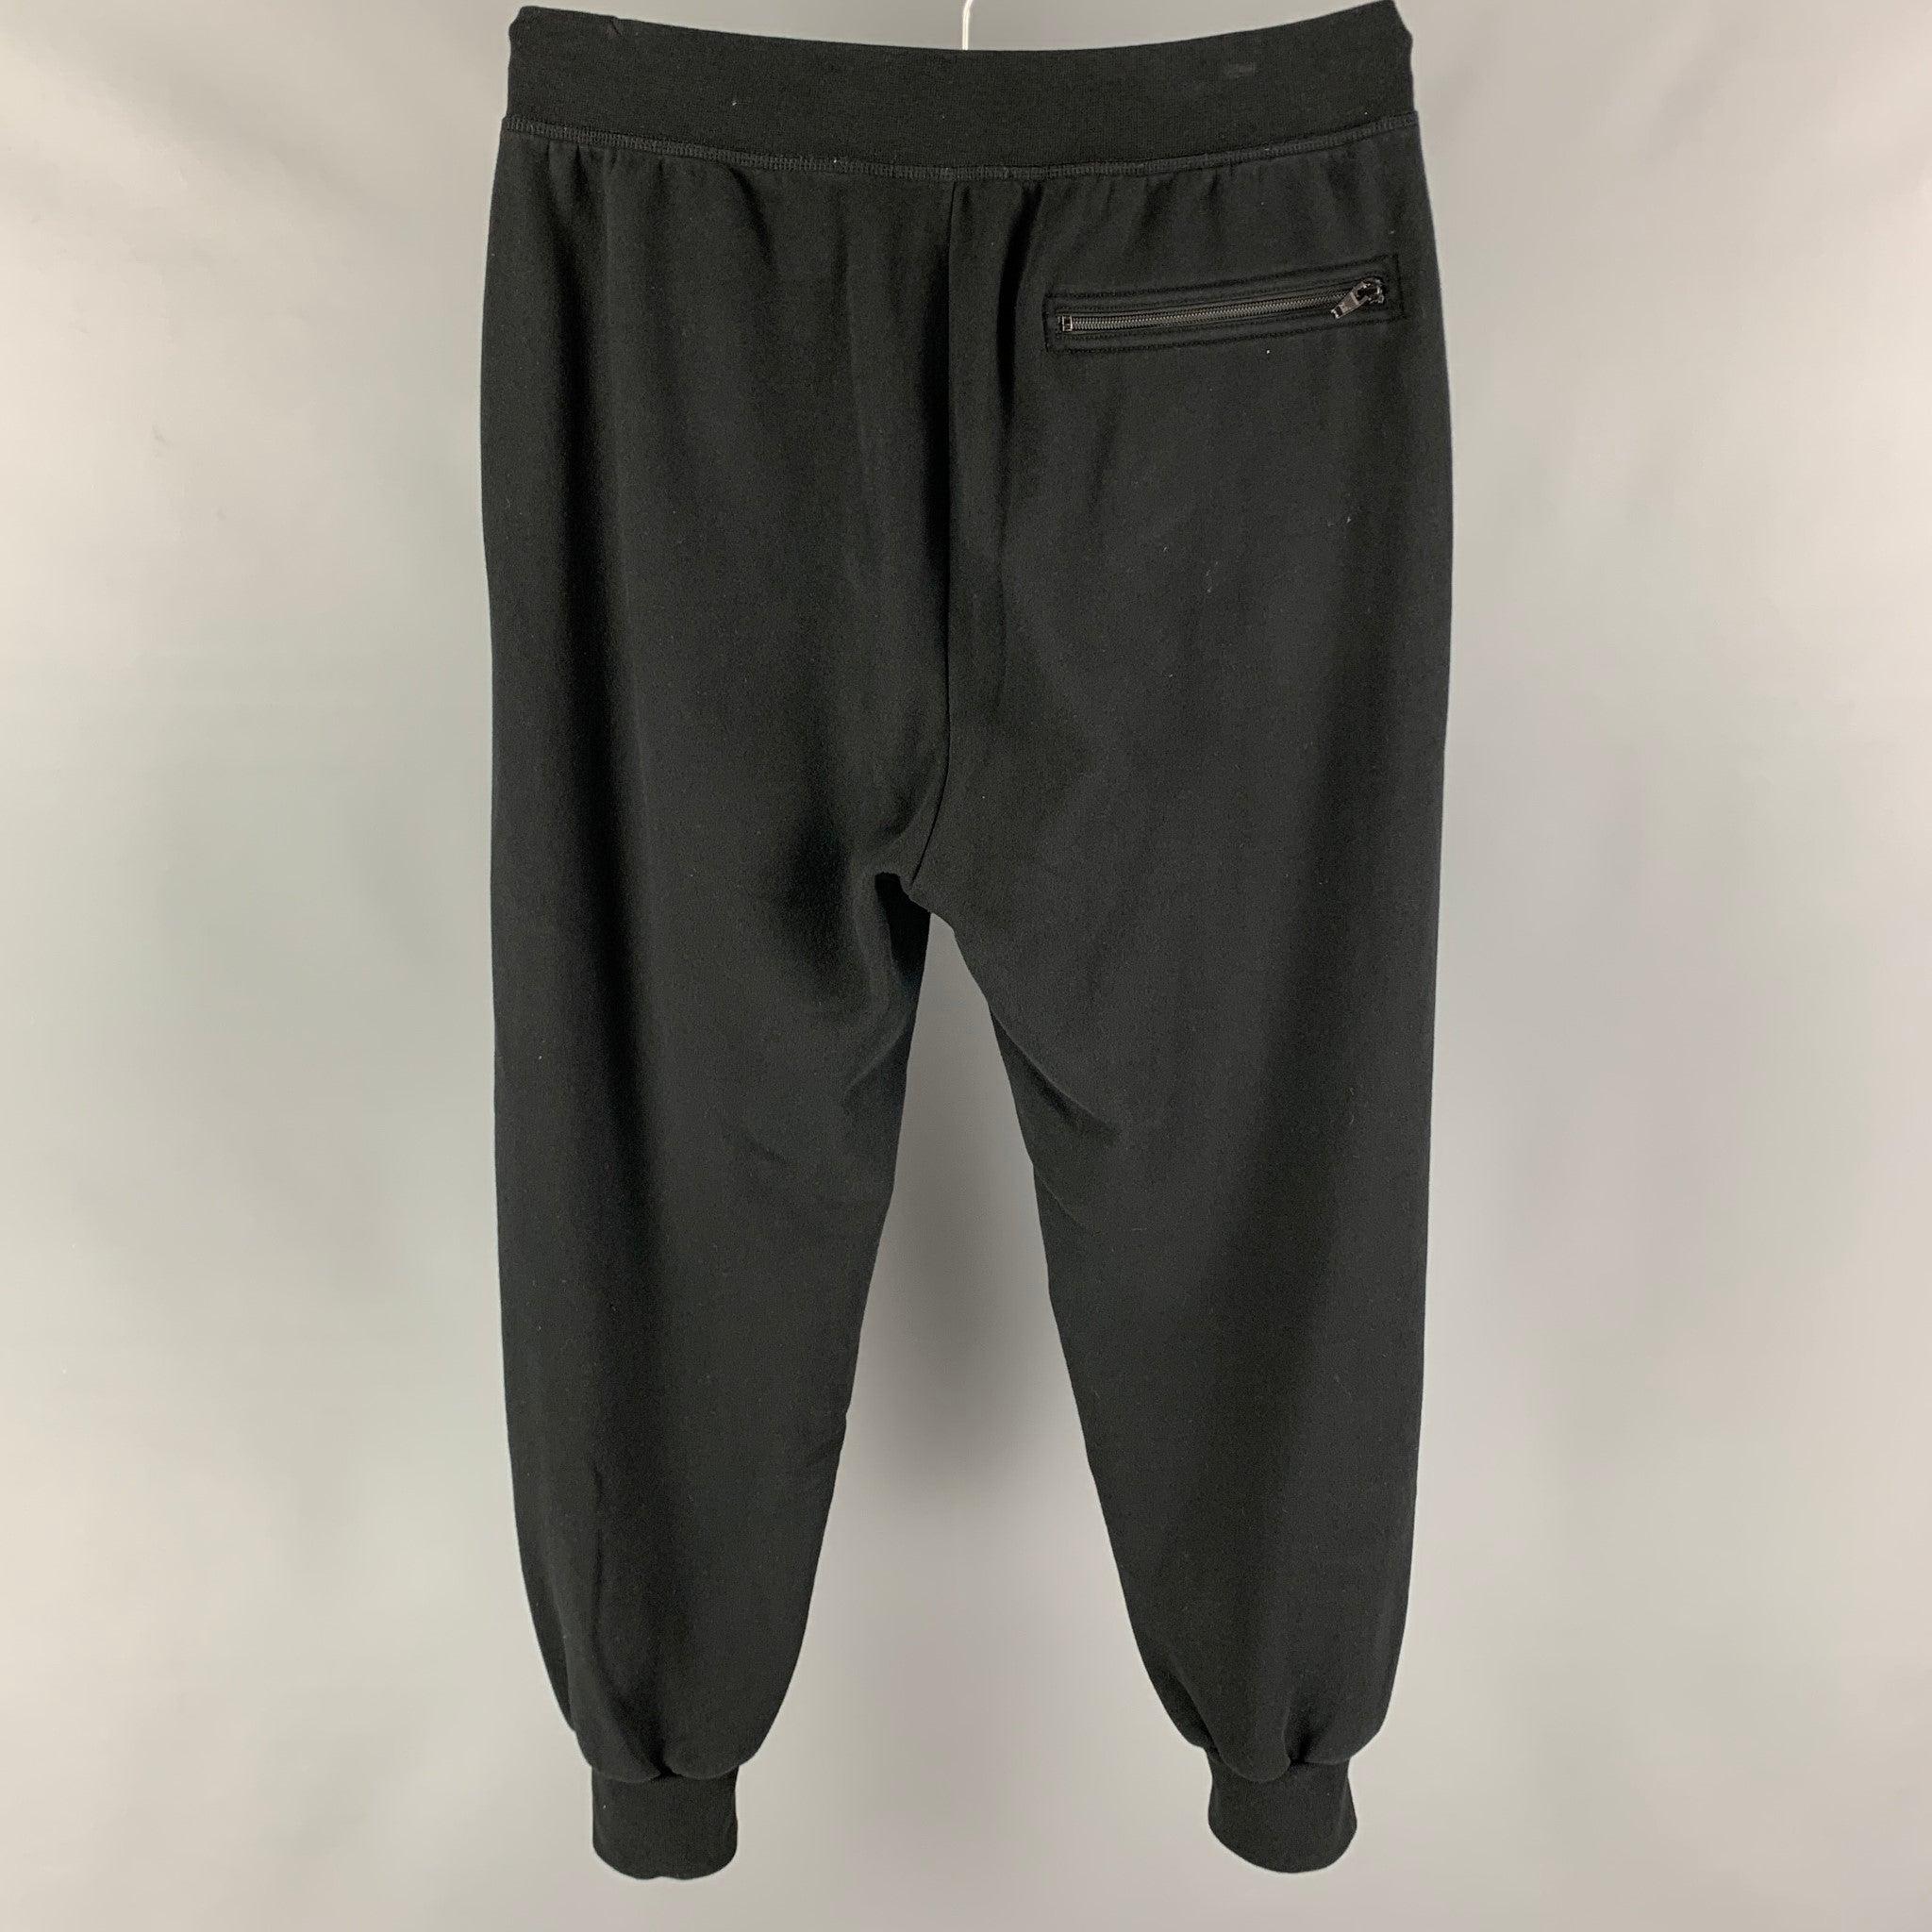 ALEXANDER WAND pants comes in a black cotton / polyester featuring a jogger style, hook & loop detail, and a zip fly closure.
Very Good
Pre-Owned Condition. 

Marked:   M 

Measurements: 
  Waist: 32 inches Rise: 14 inches Inseam: 28 inches Leg